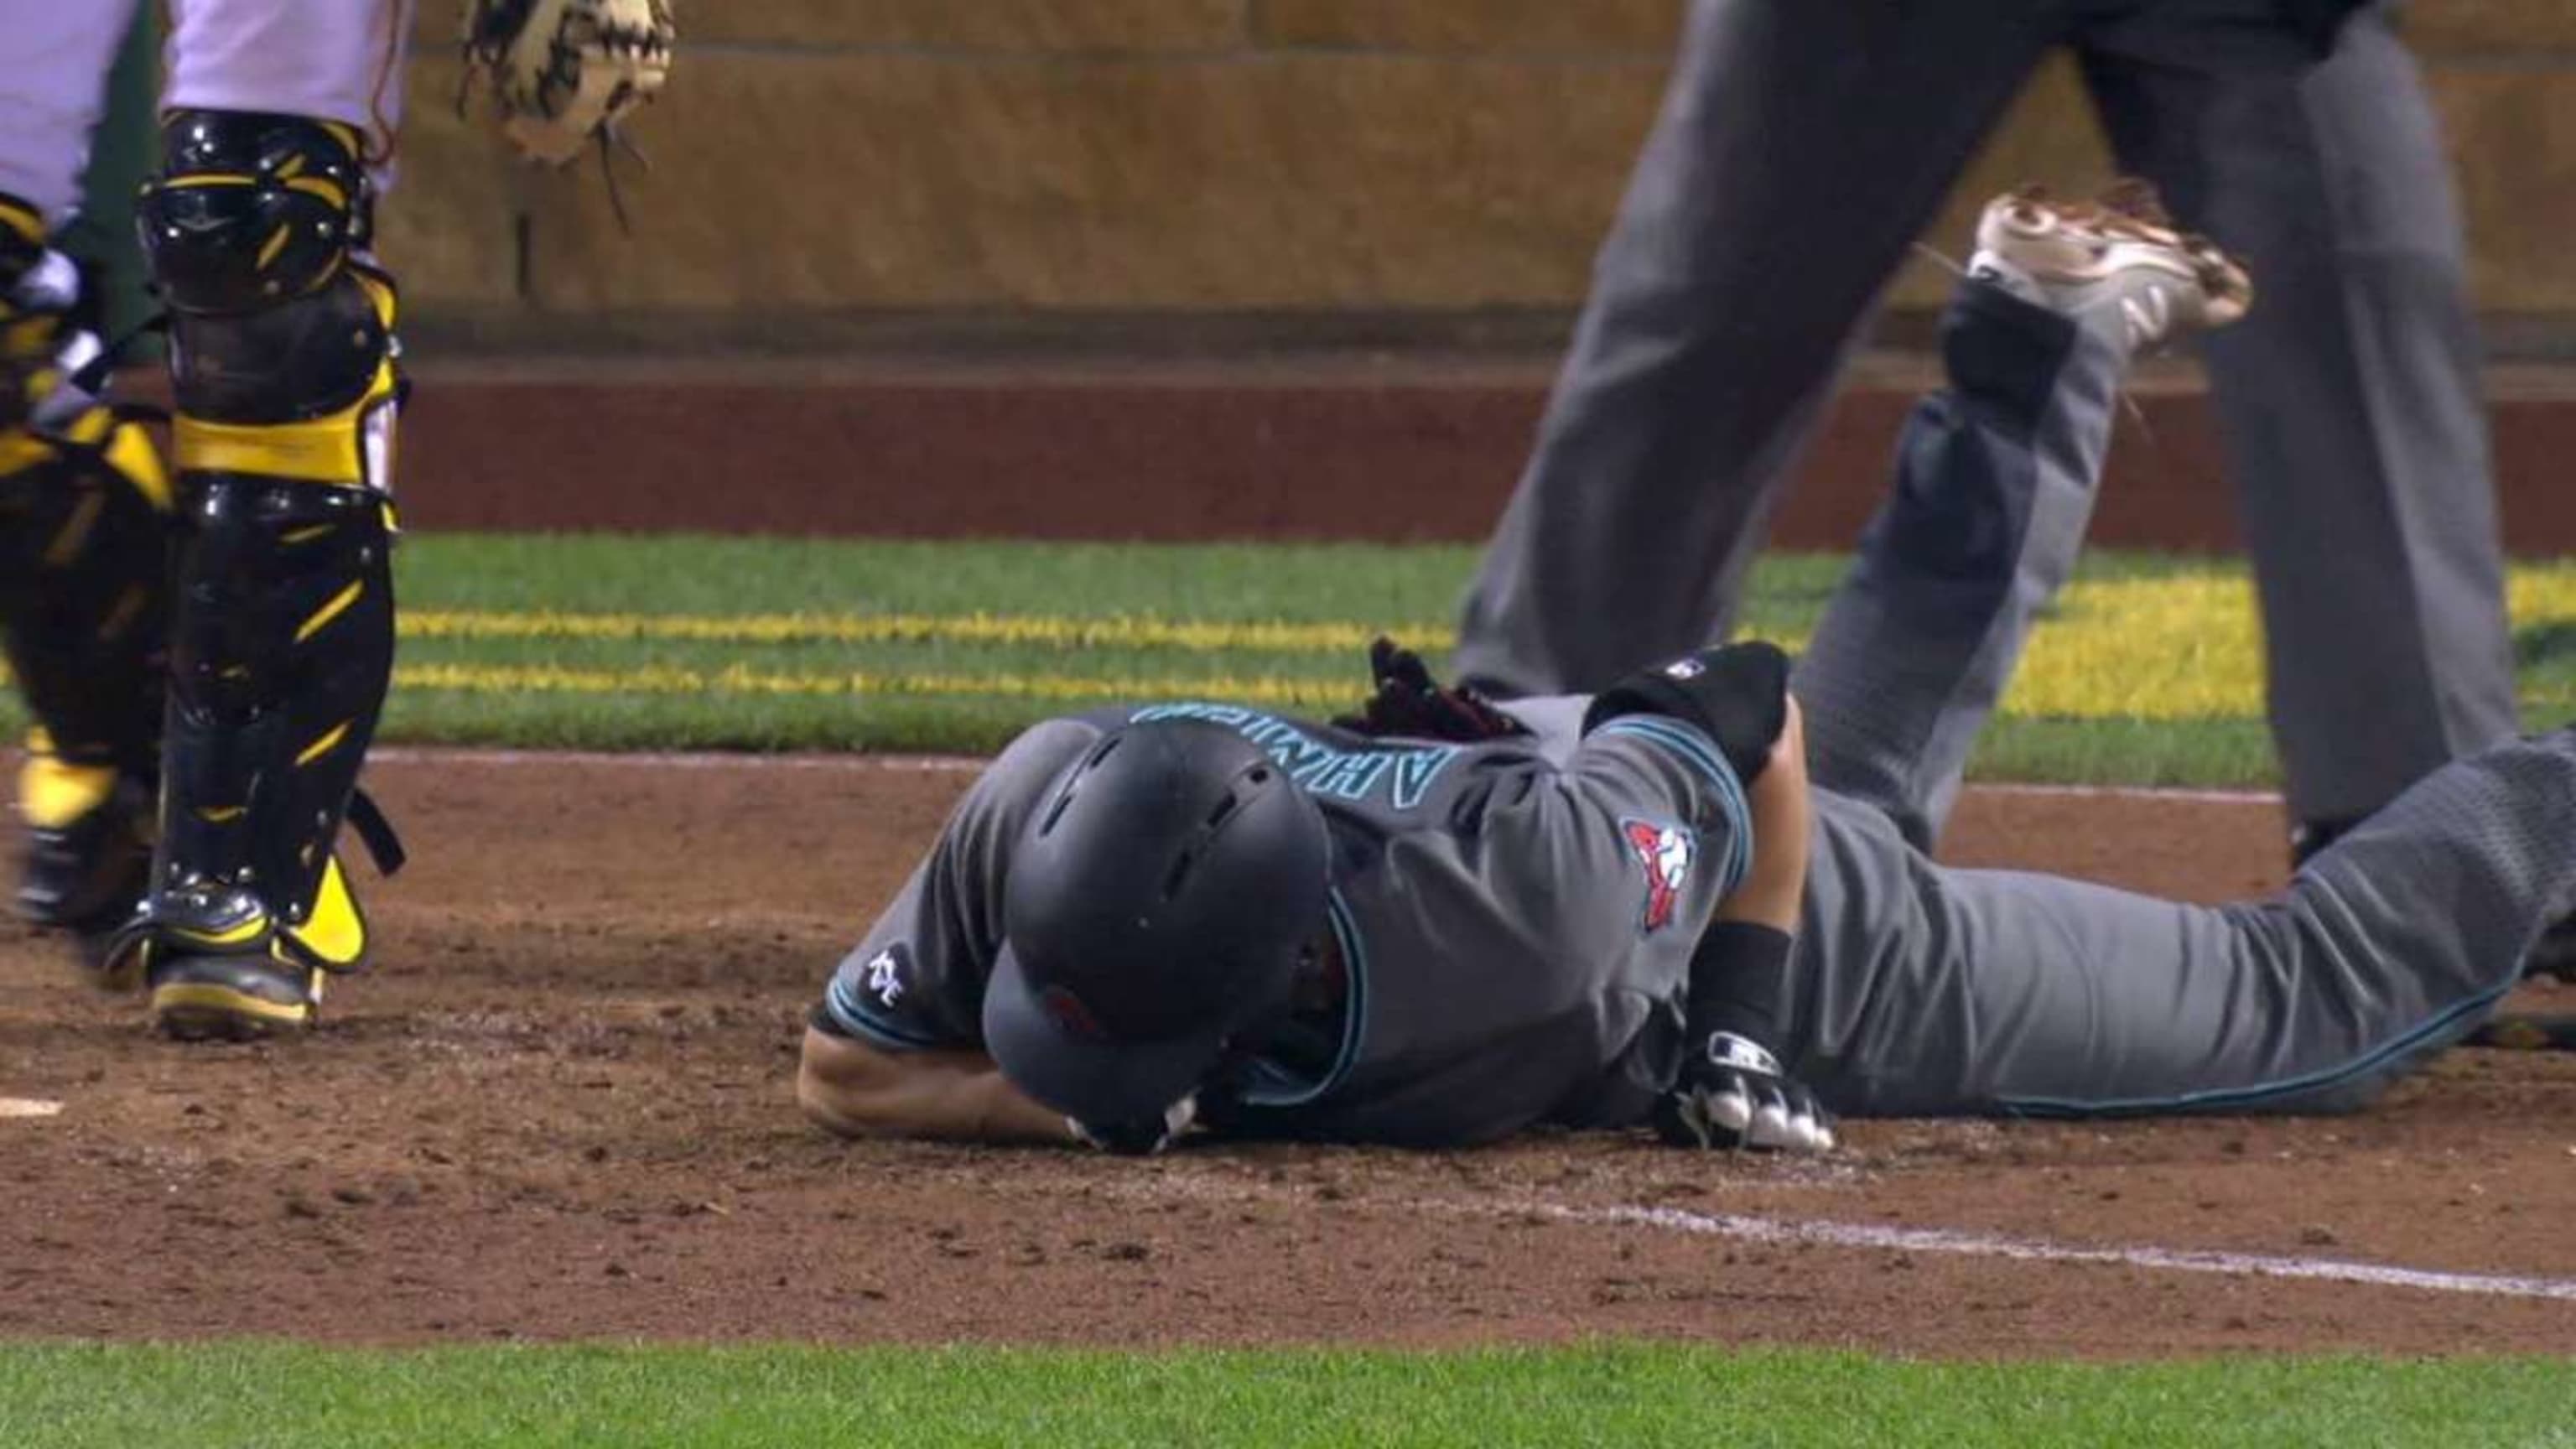 MLB ump Vanover still in hospital after hit in head by throw